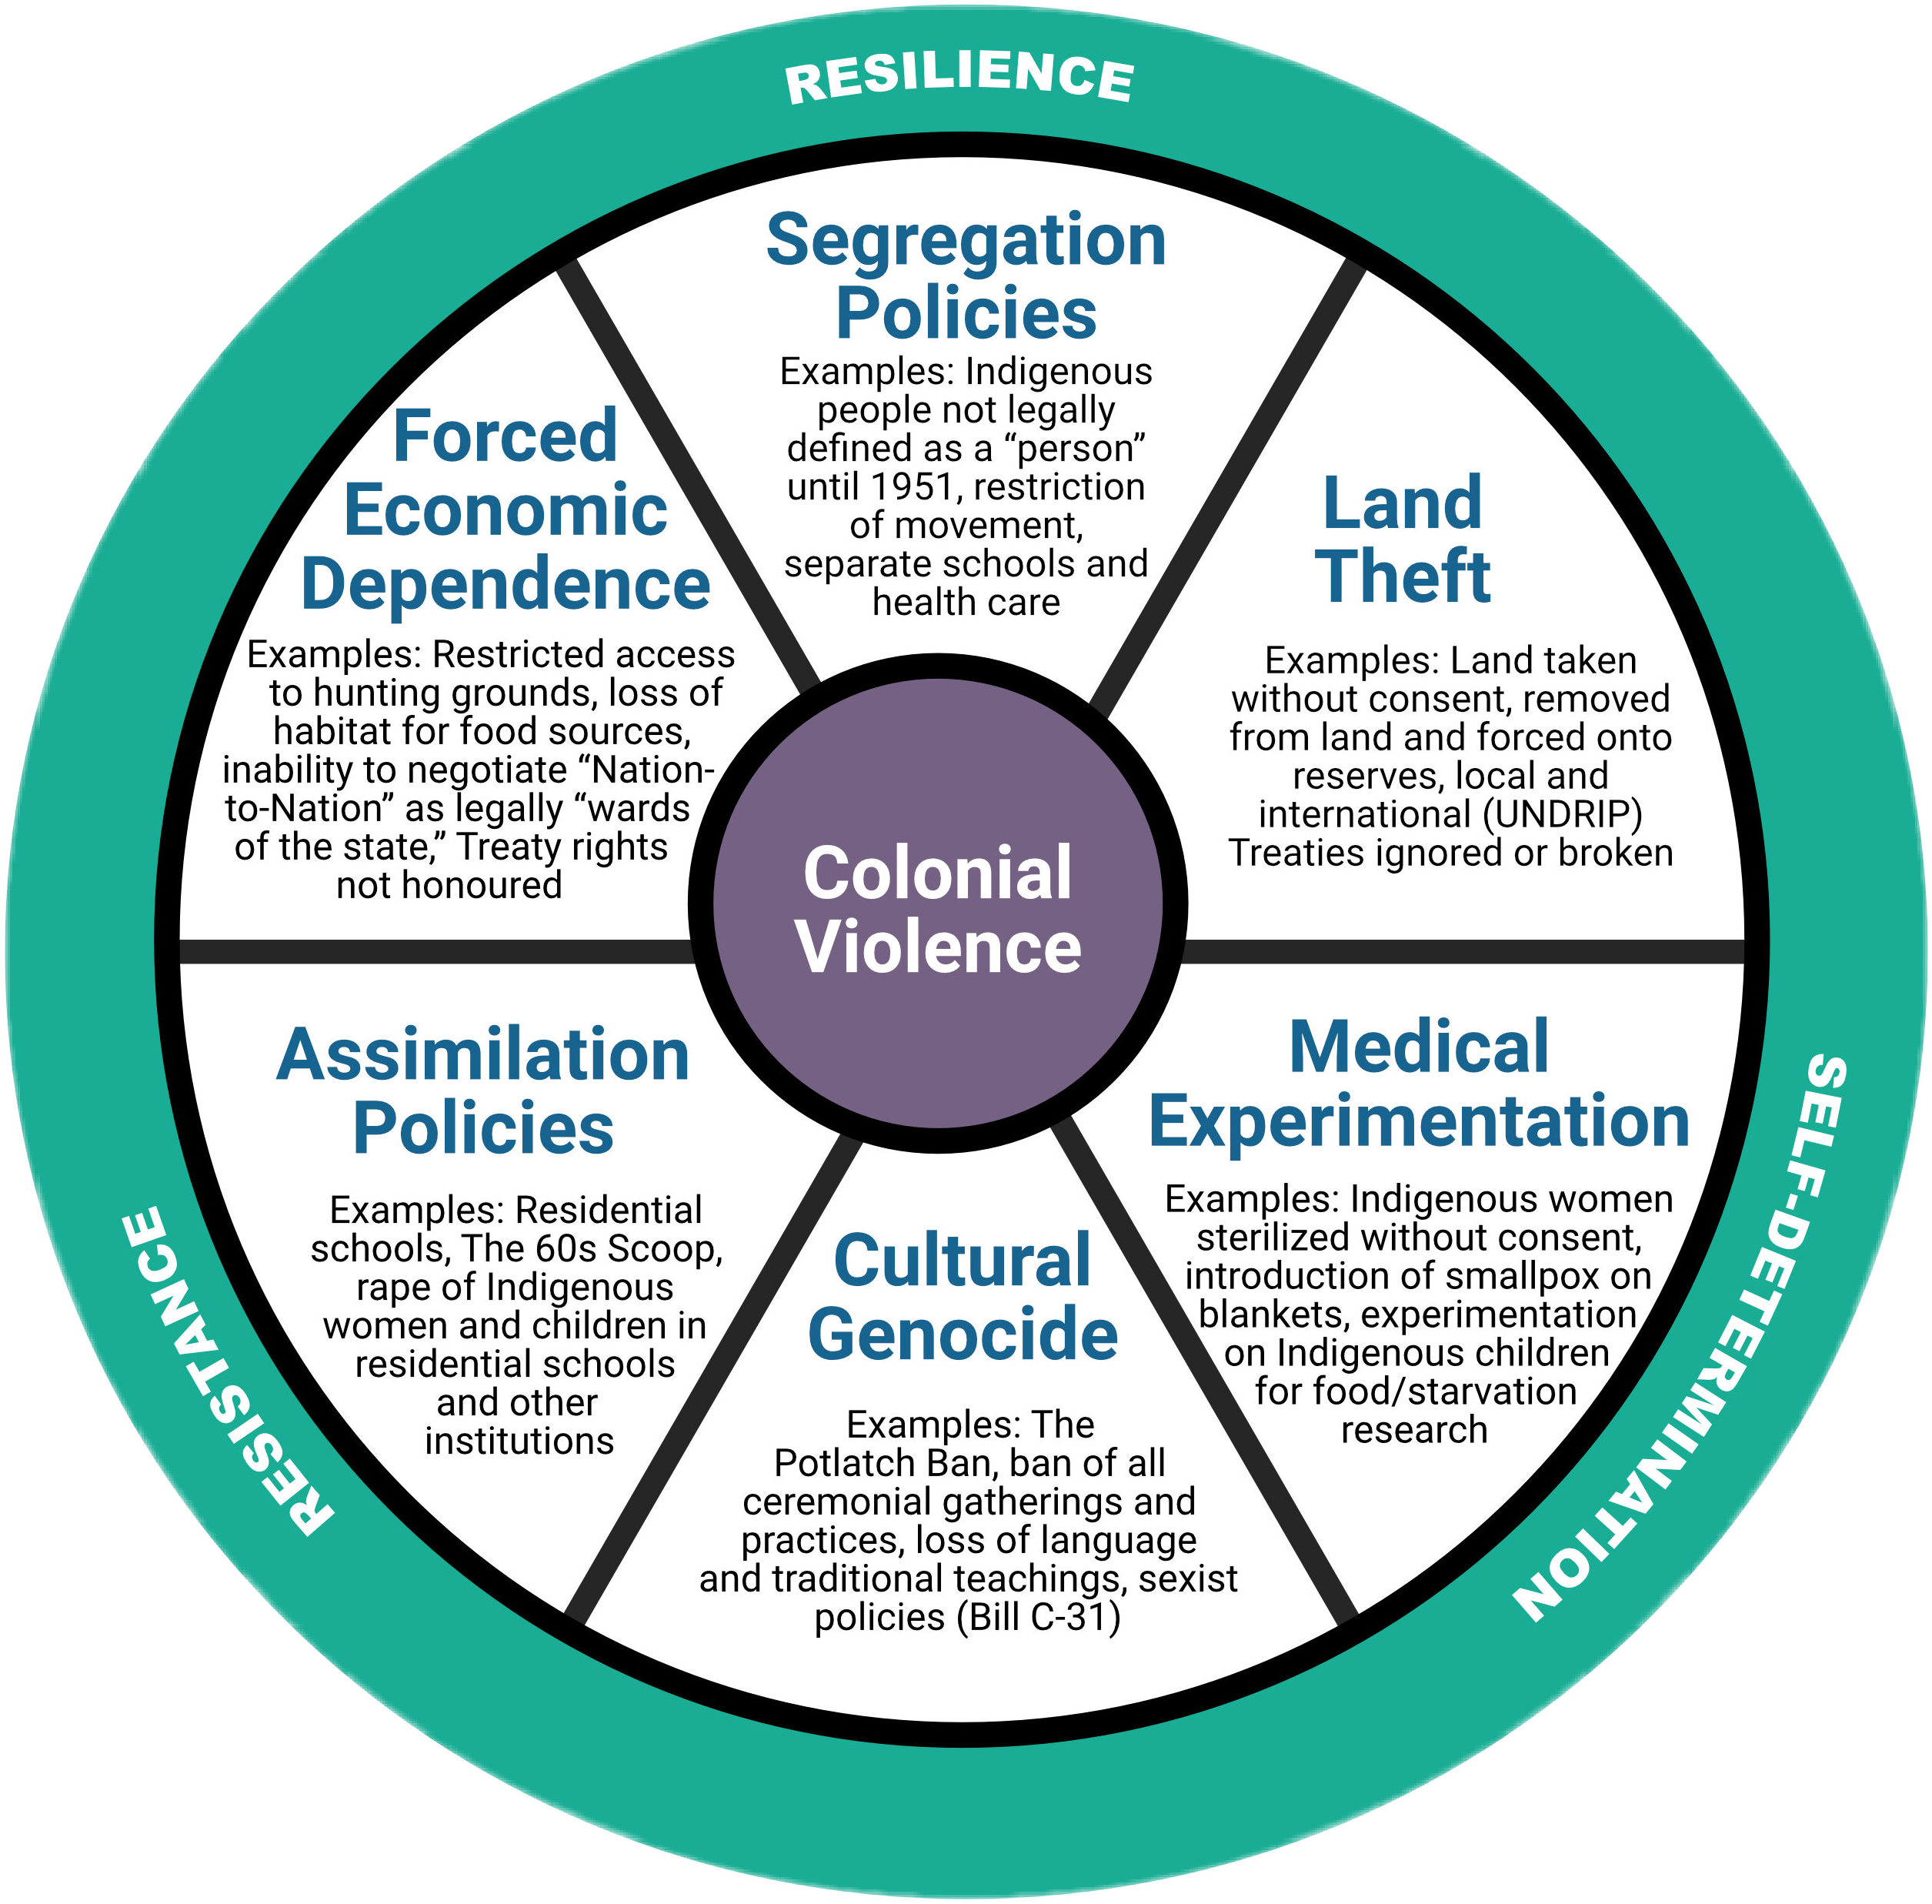 The colonial violence wheel. Image description linked in caption.